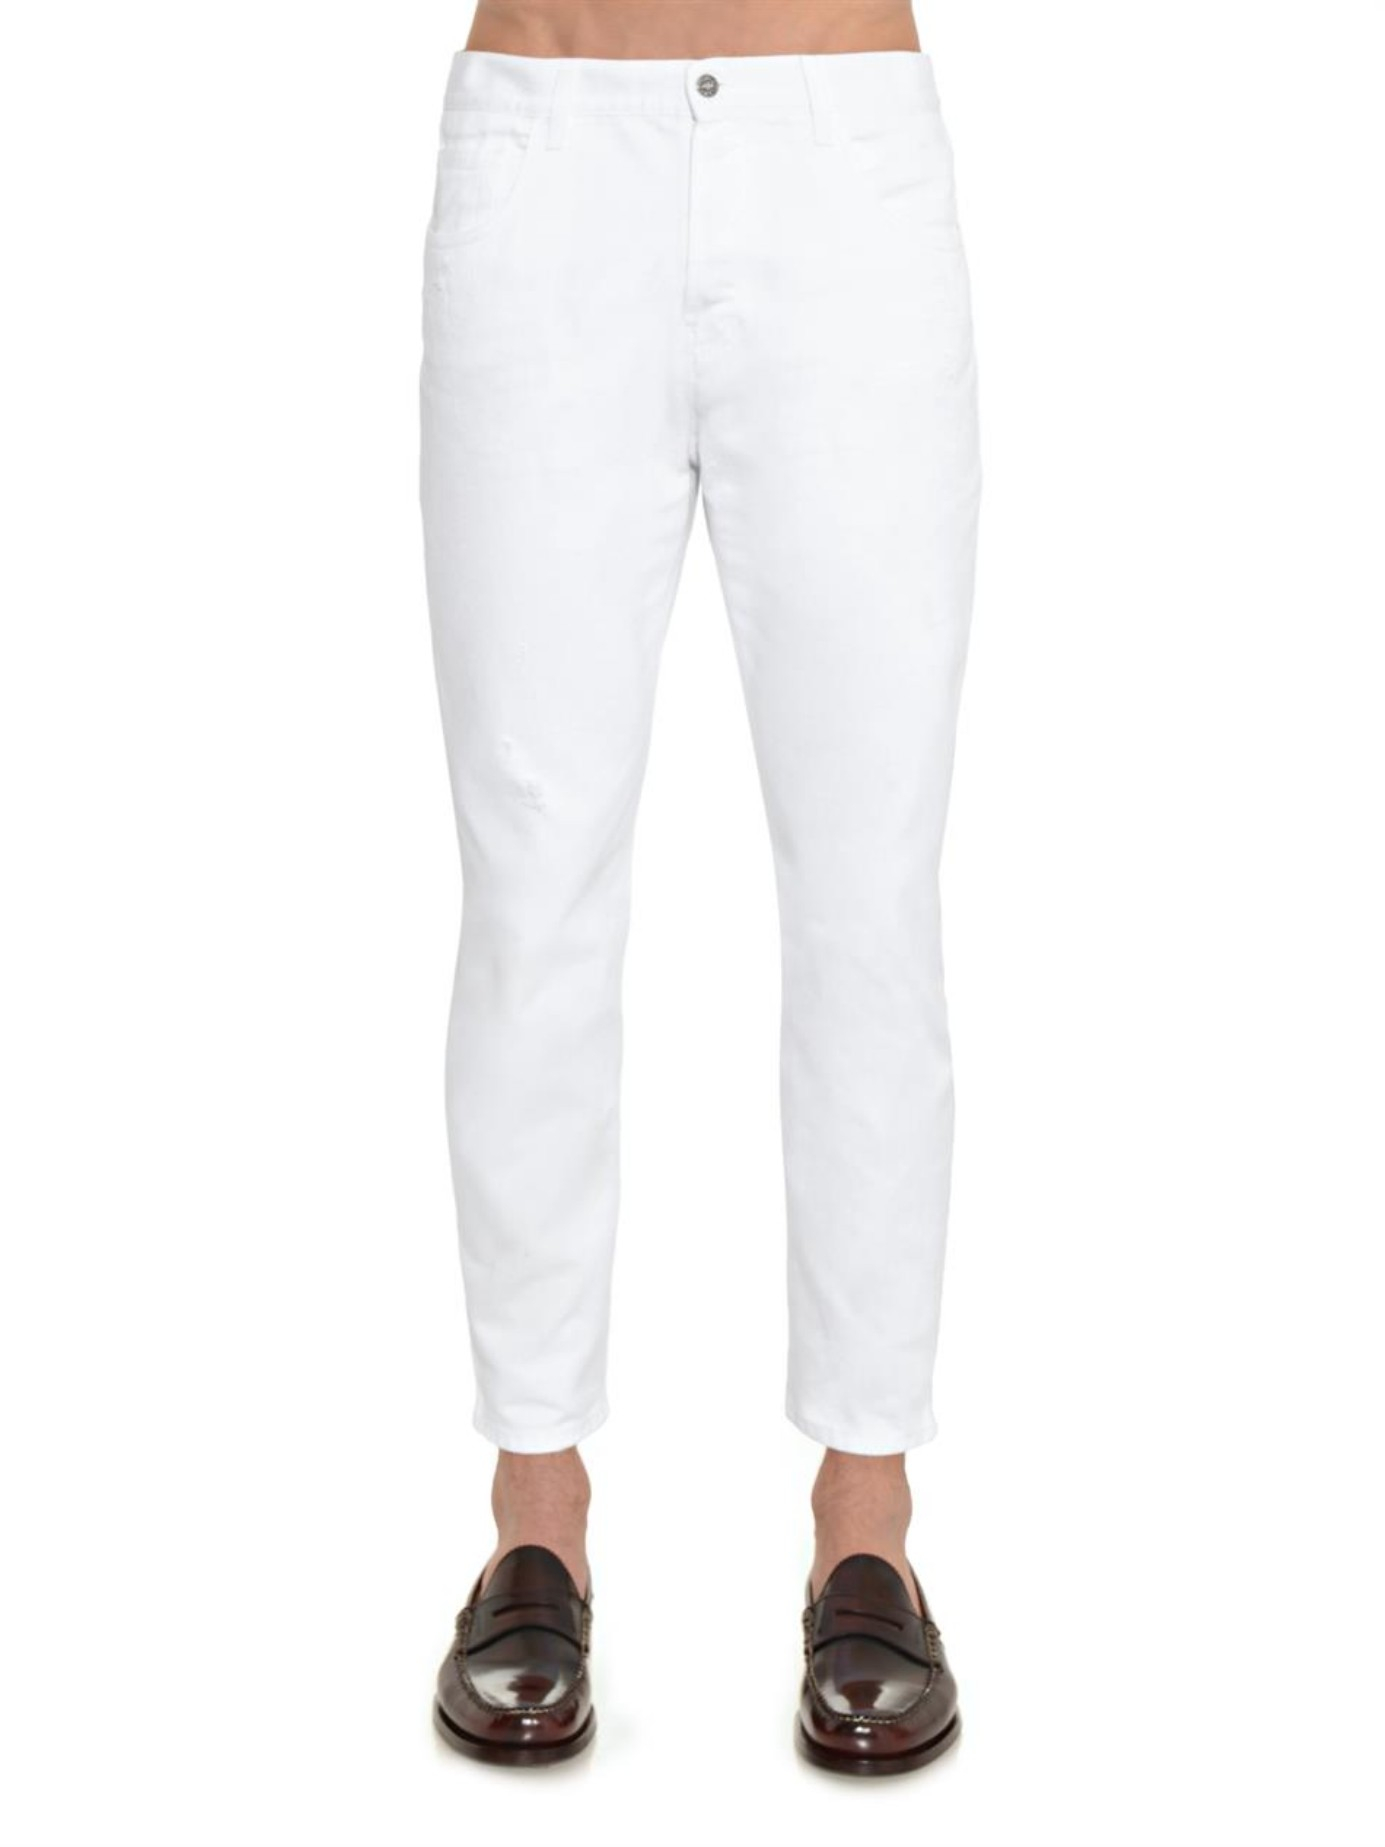 Gucci Distressed Slim-fit Jeans in White for Men - Lyst